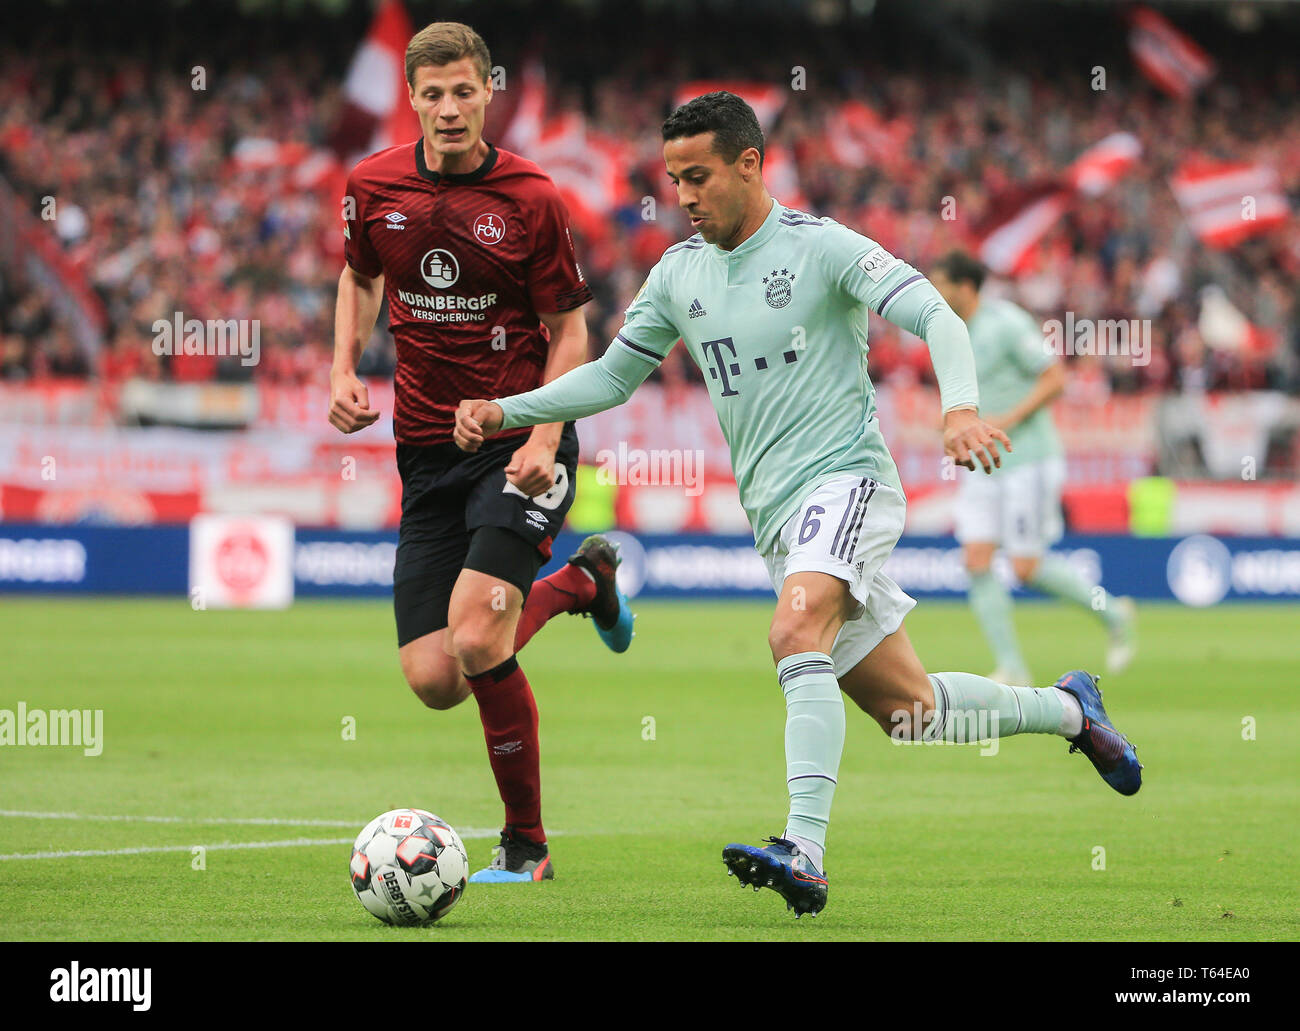 Nuremberg, Germany. 28th Apr, 2019. Bayern Munich's Thiago (R) competes during a German Bundesliga match between 1.FC Nuremberg and FC Bayern Munich in Nuremberg, Germany, on April 28, 2019. The match ended 1-1. Credit: Philippe Ruiz/Xinhua/Alamy Live News Stock Photo